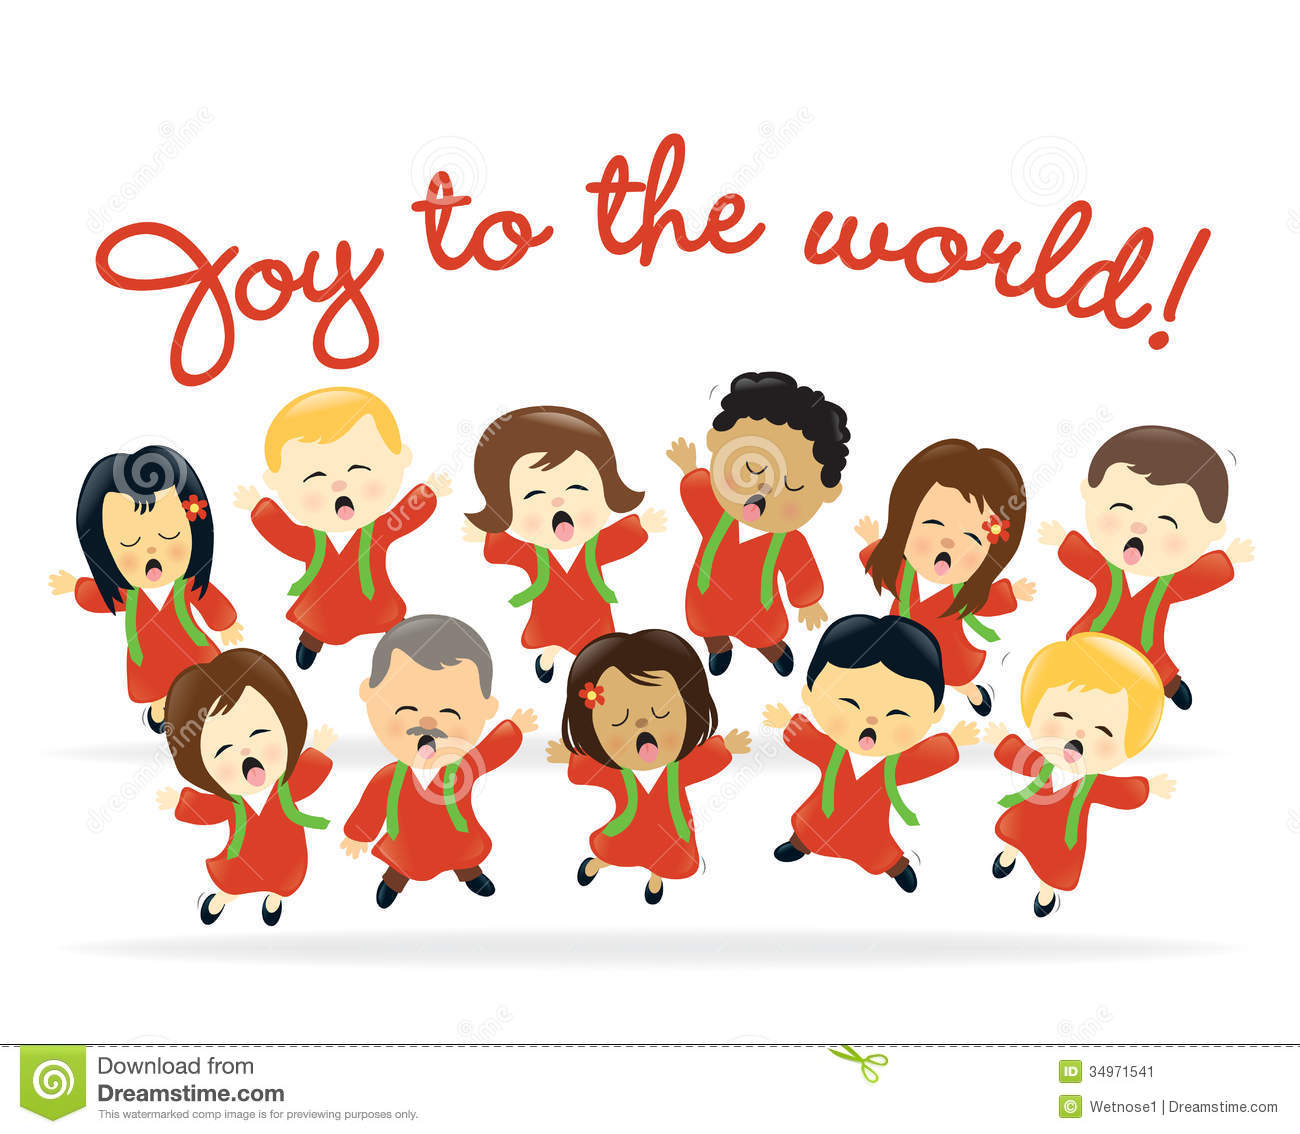 Diverse people singing and. Choir clipart preschool